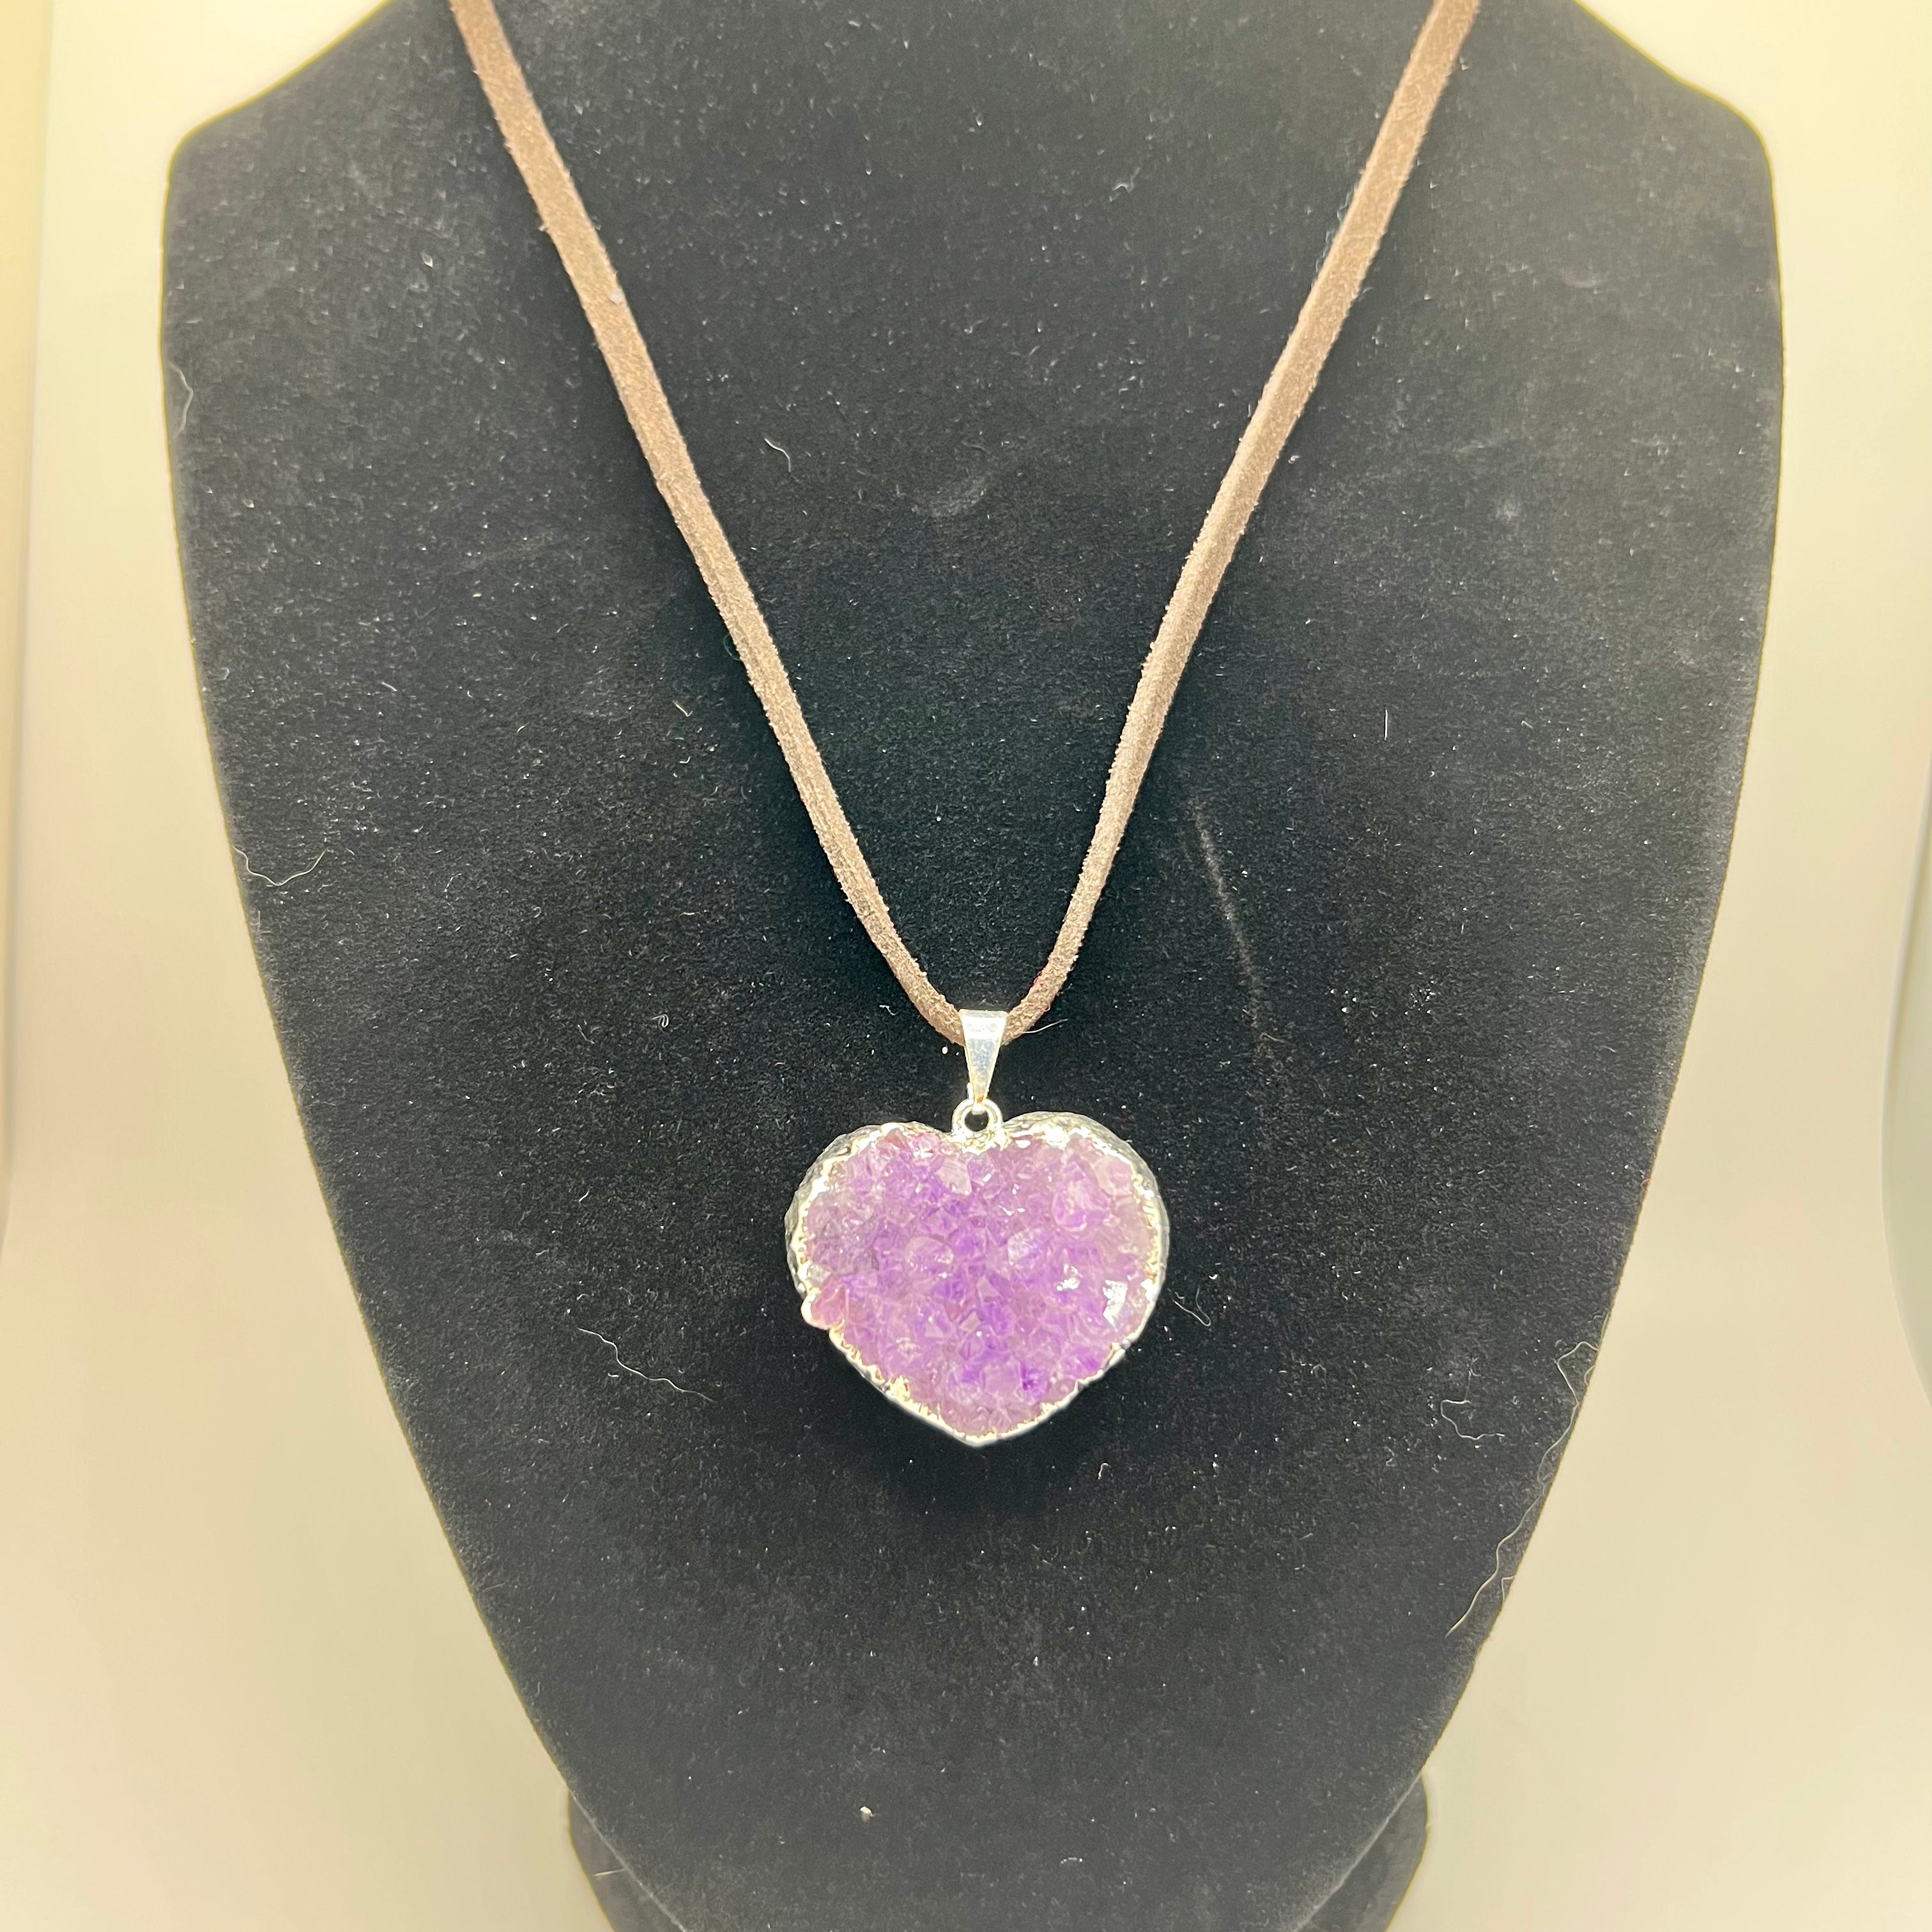 Amethyst Heart Leather Cord Necklace